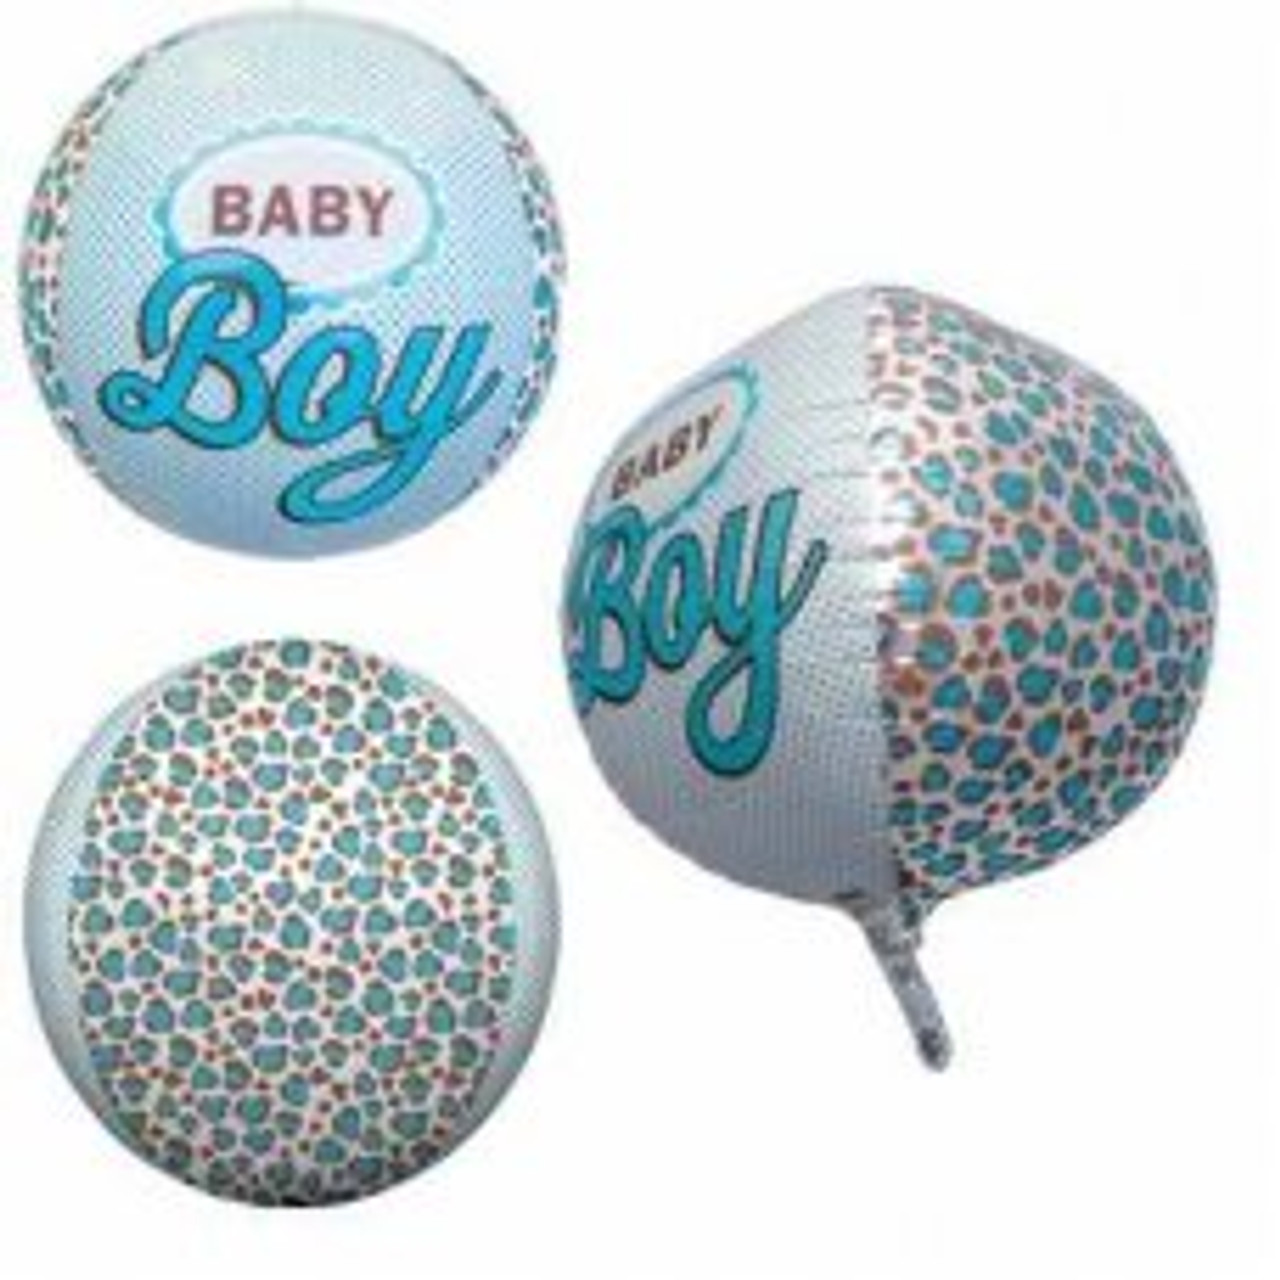 212411 BABY BOY 3D SPHERE FOIL BALLOON 43cm uninflated